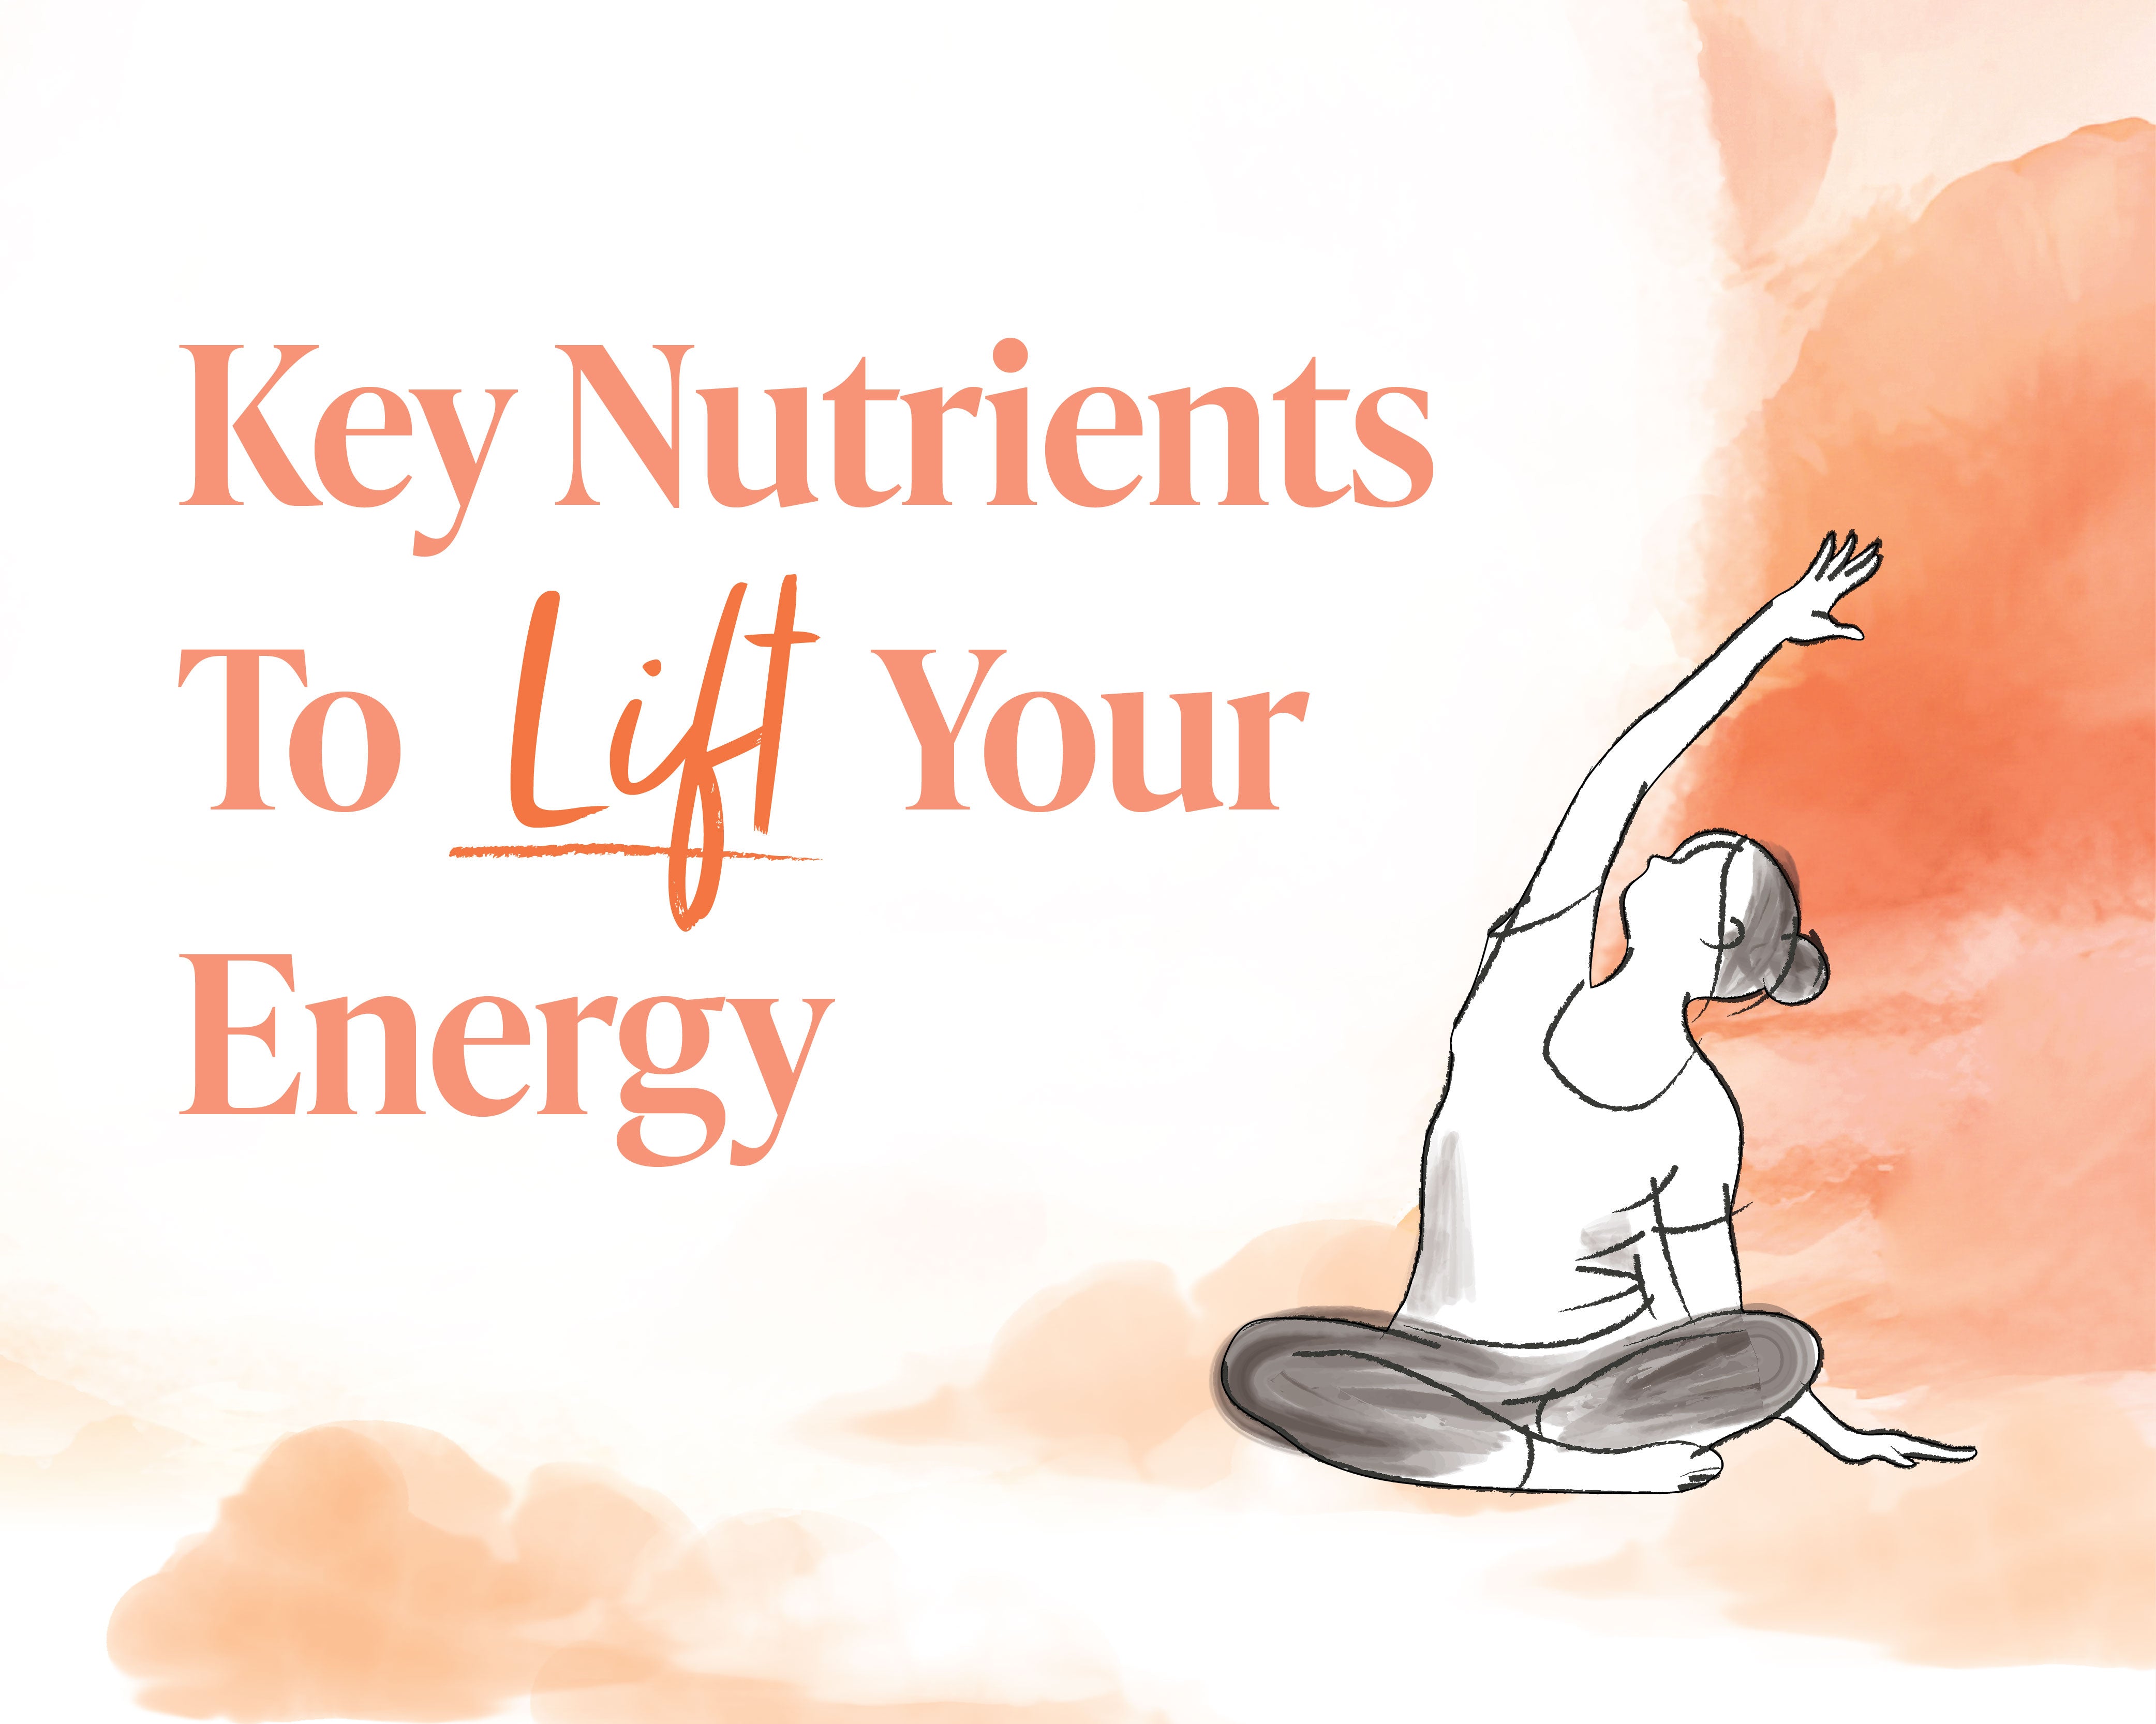 Power up your body with these energy nutrients